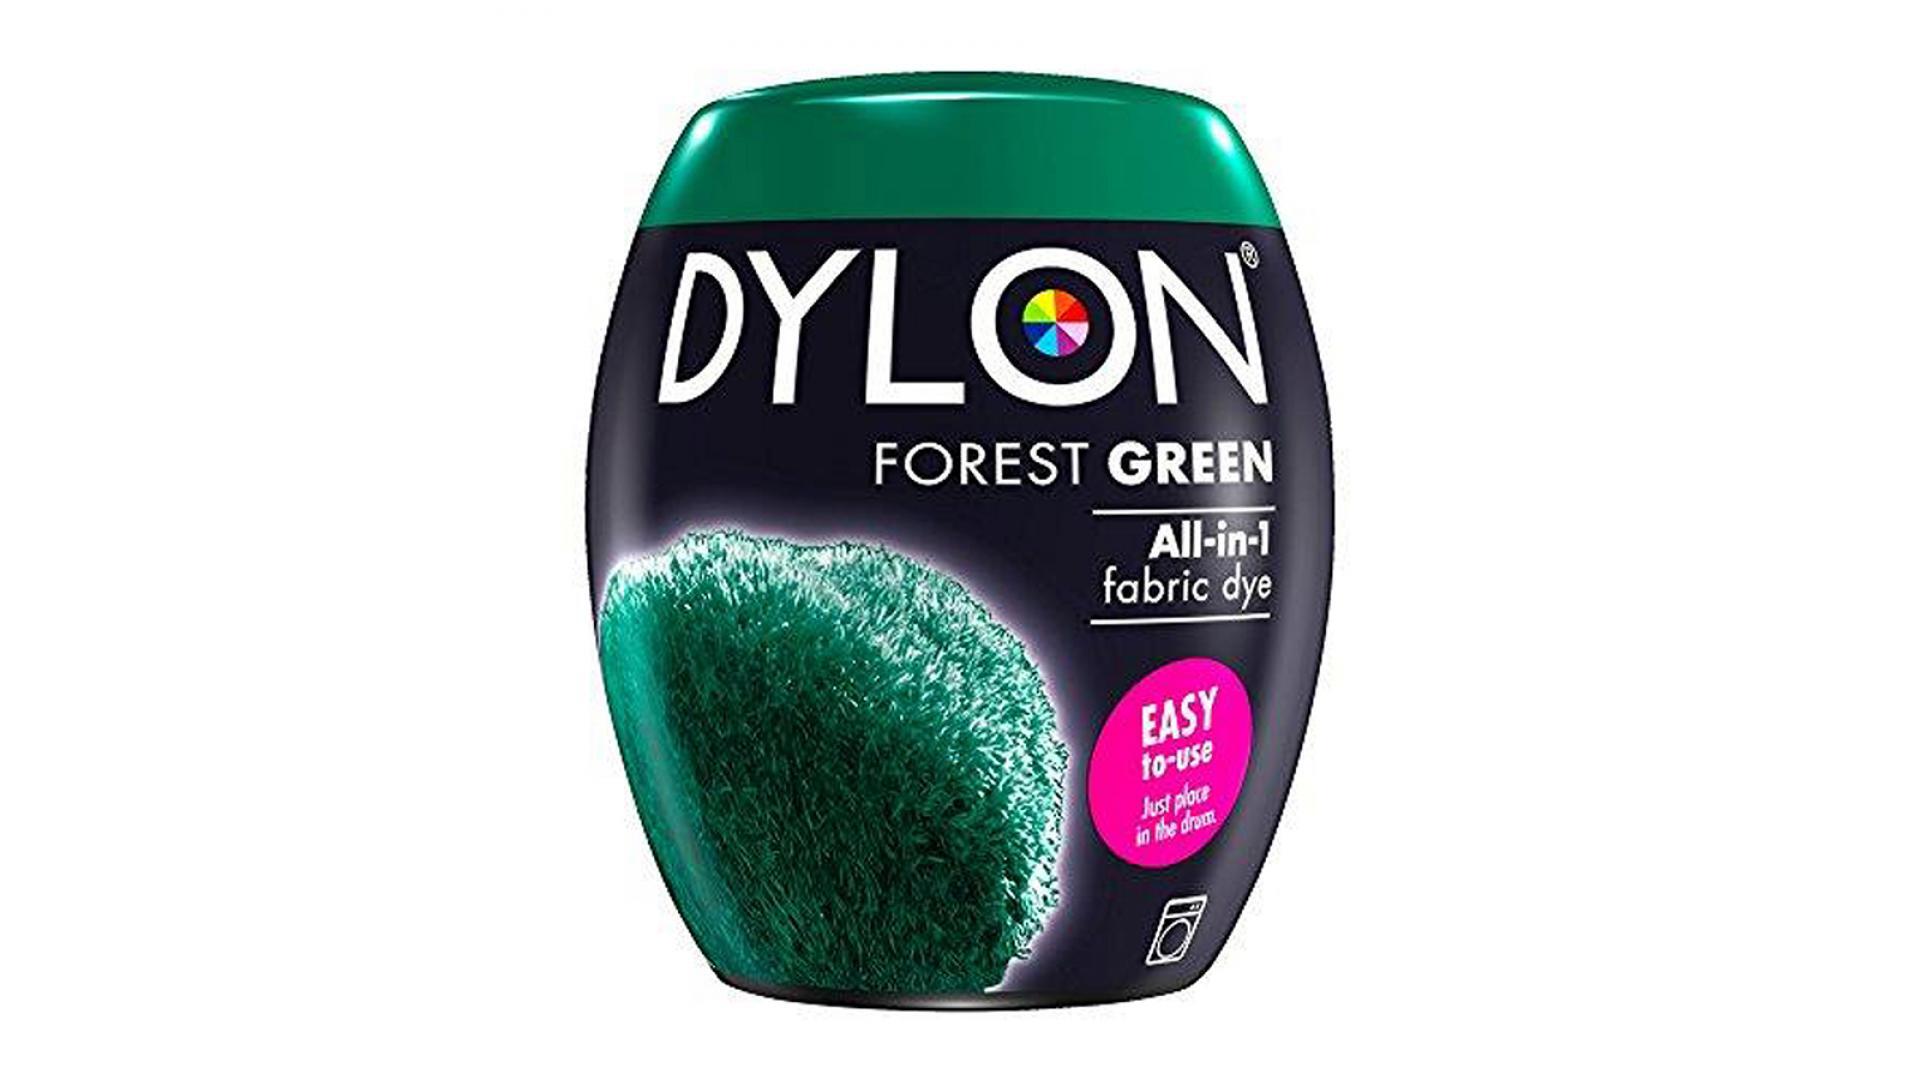 Fabric Dye for All Washable Fabrics Forest Green (55g) - Dyon Center N.V.